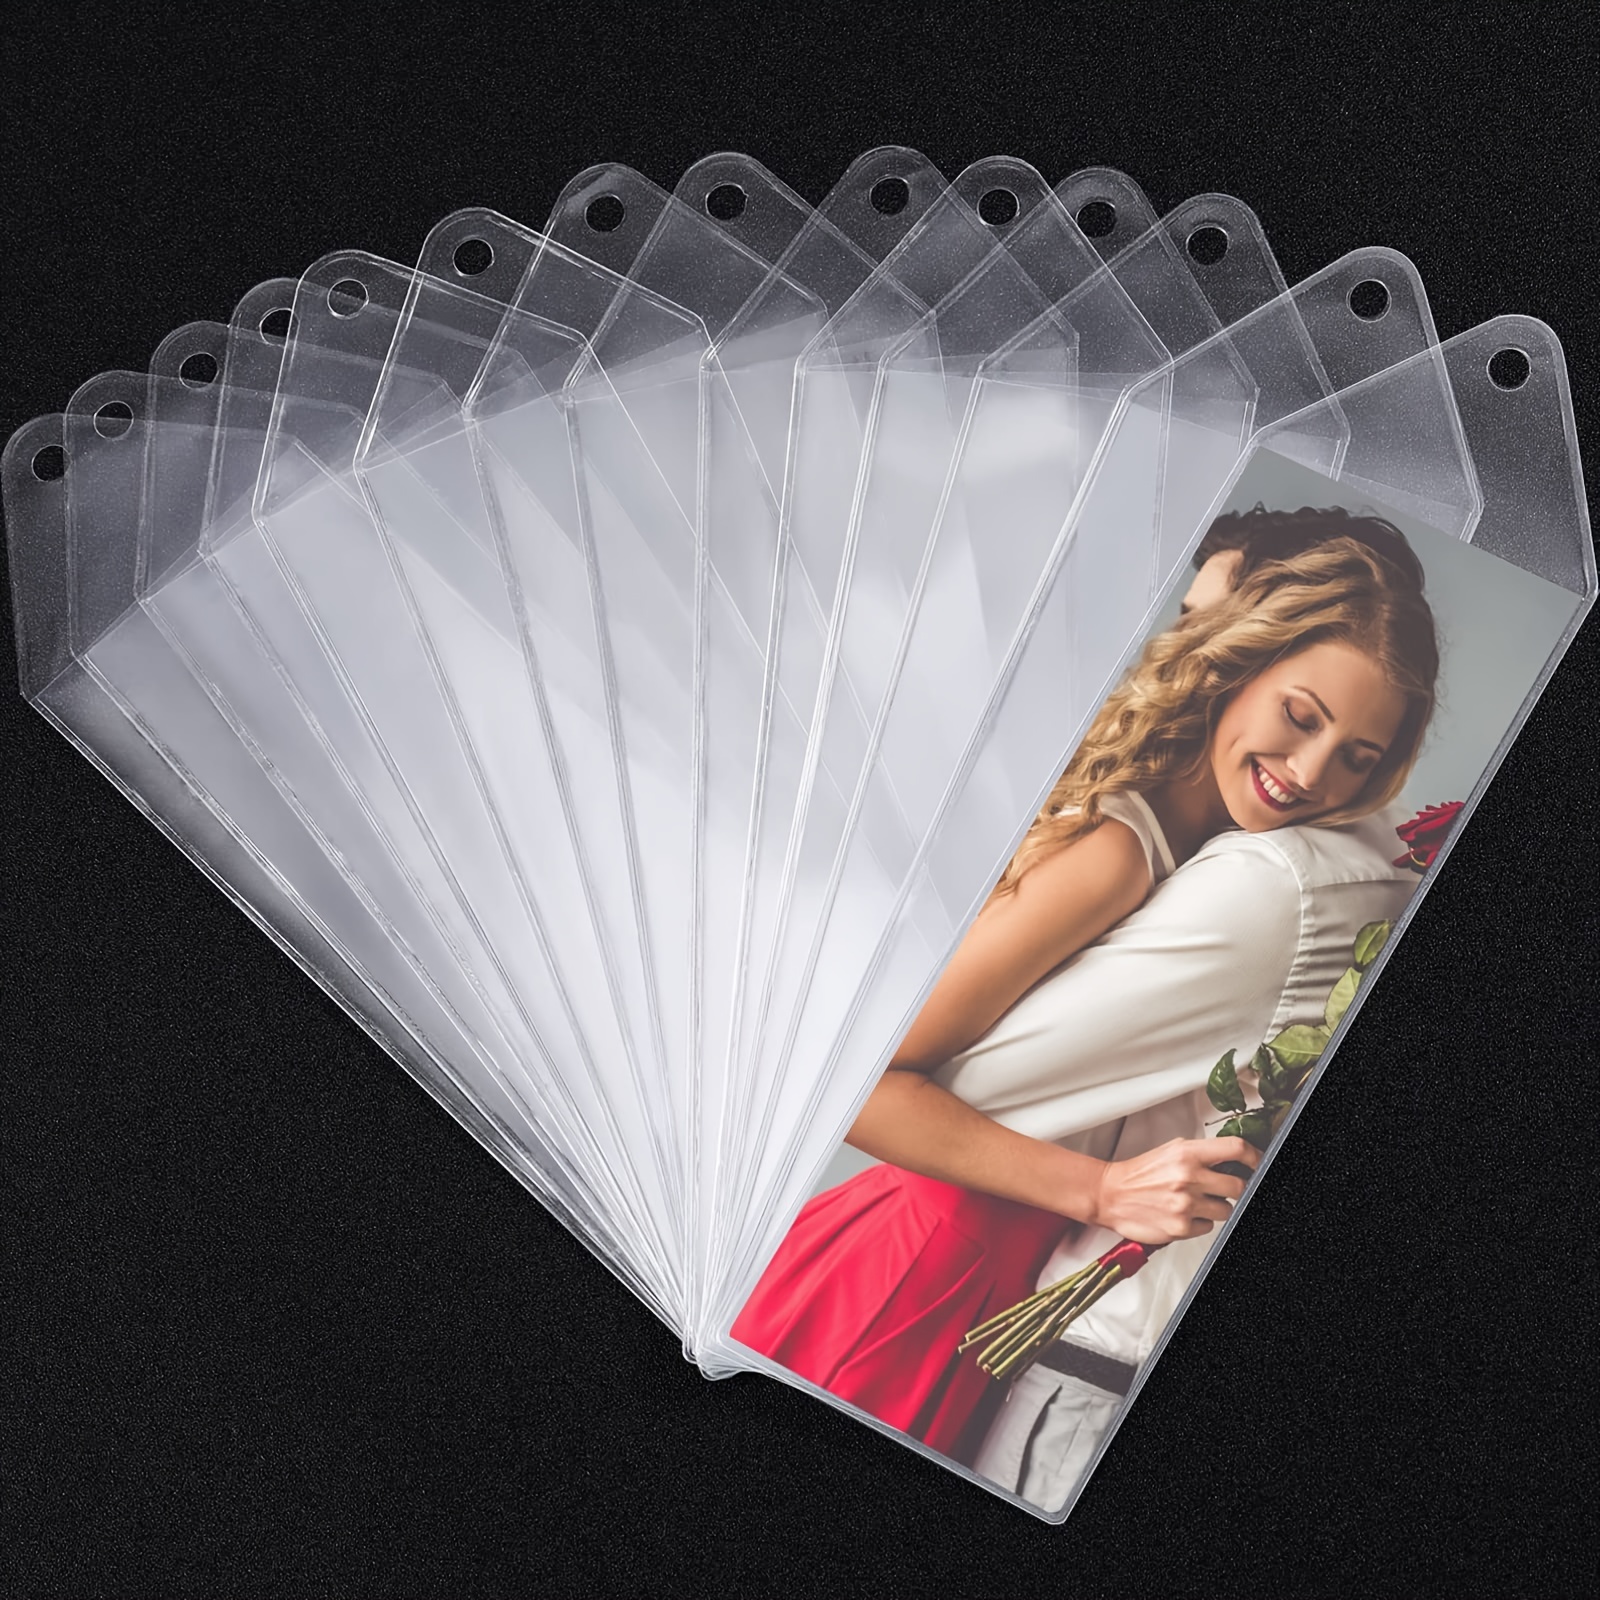  Photo Booth Nook Bookmark Sleeves - Vinyl Photobooth Strip  Frames, Picture Strip Holder, Lightweight, Shatterproof Material - Ideas  for Party Favors - 2 1/2 X 7 1/8-Inch (50 Count) : Home & Kitchen